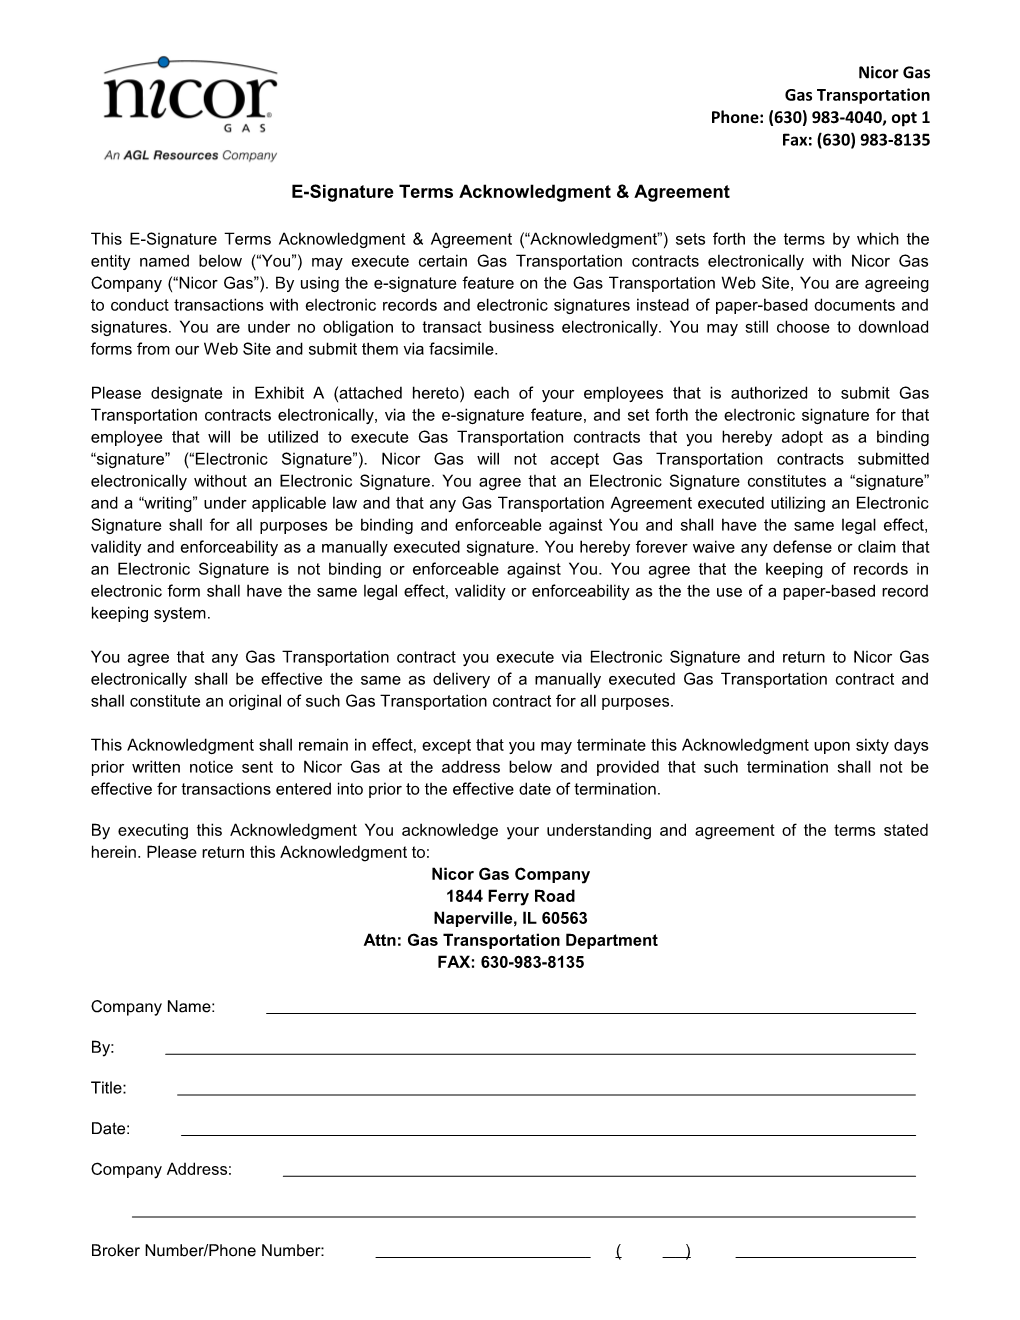 E-Signature Terms Acknowledgment & Agreement